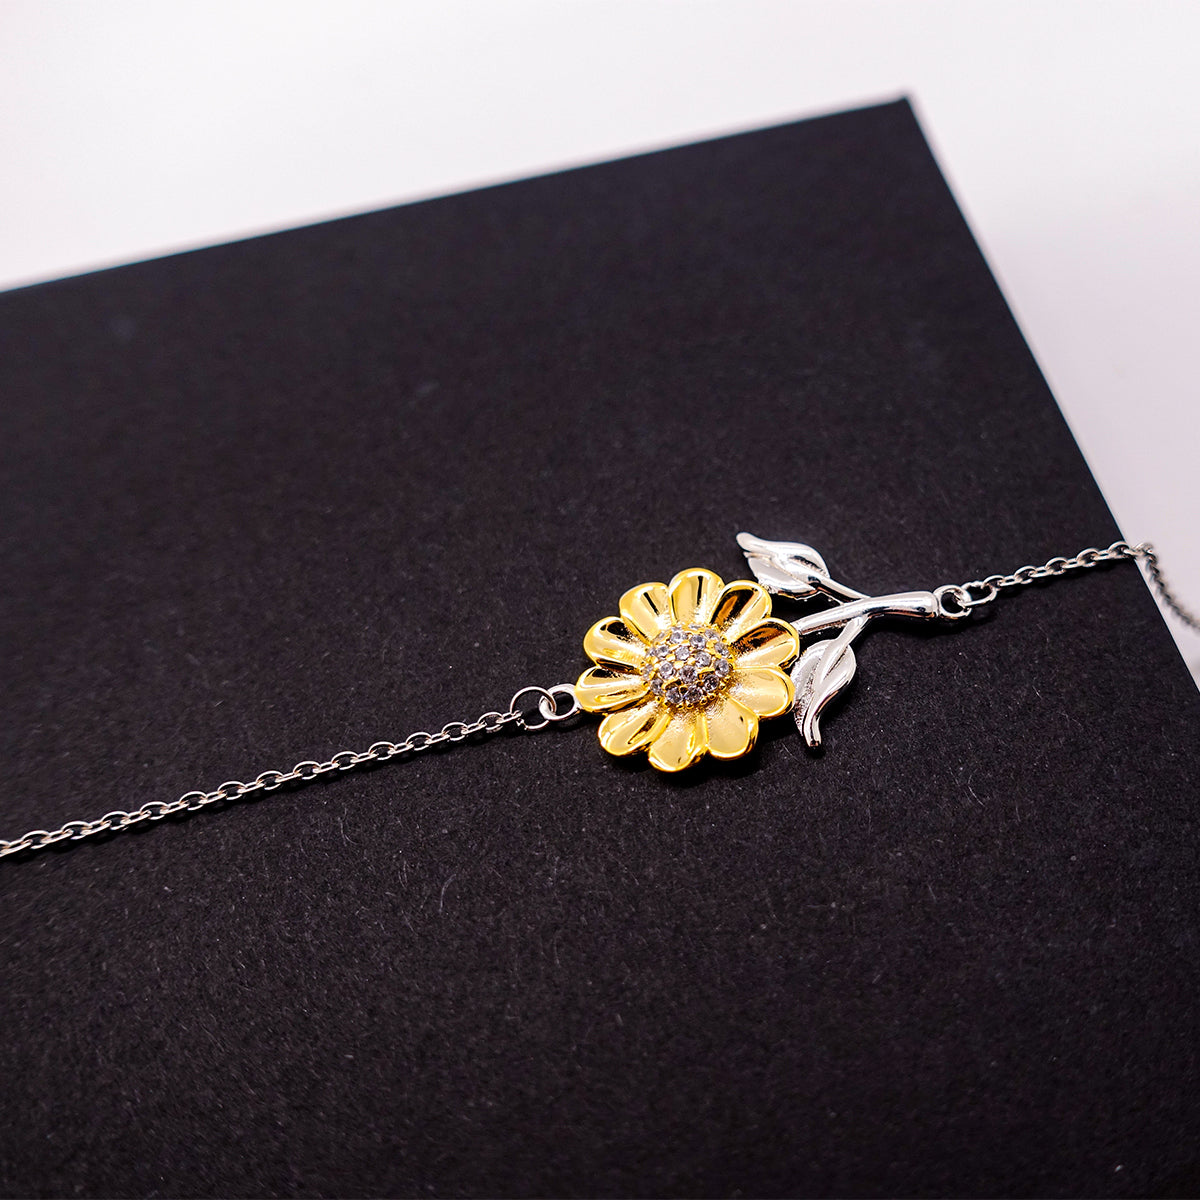 Mother In Law Sunflower Bracelet You Will Always Have a Special Place in My Heart Inspirational Gift for Birthday, Christmas, and Holidays